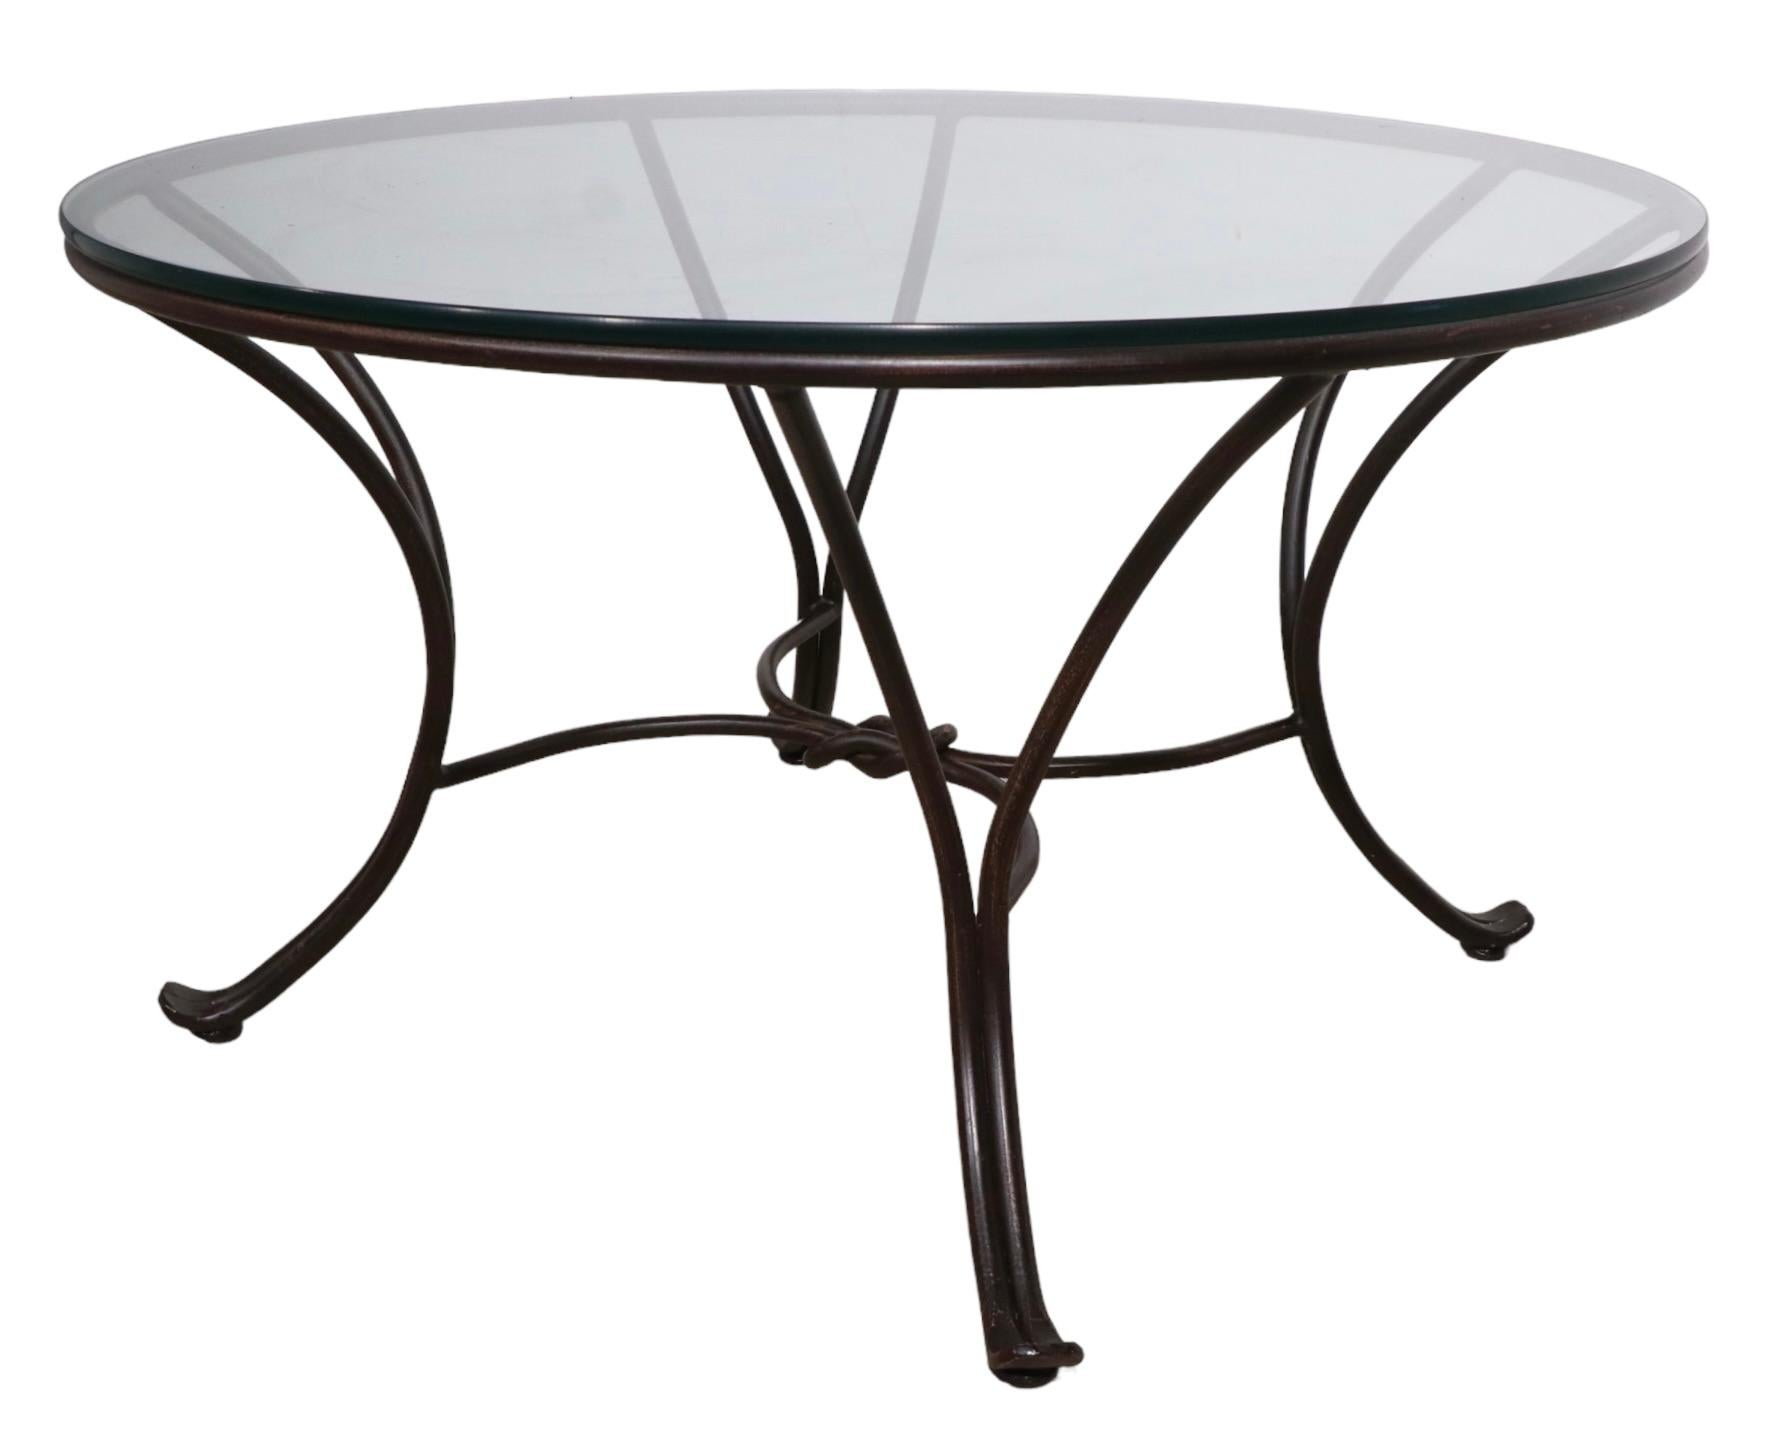 Stylish wrought iron and glass coffee table, suitable for both indoor and outdoor use. Probably circa 1970, in the manner of Woodard, Salterini etc. unsigned.